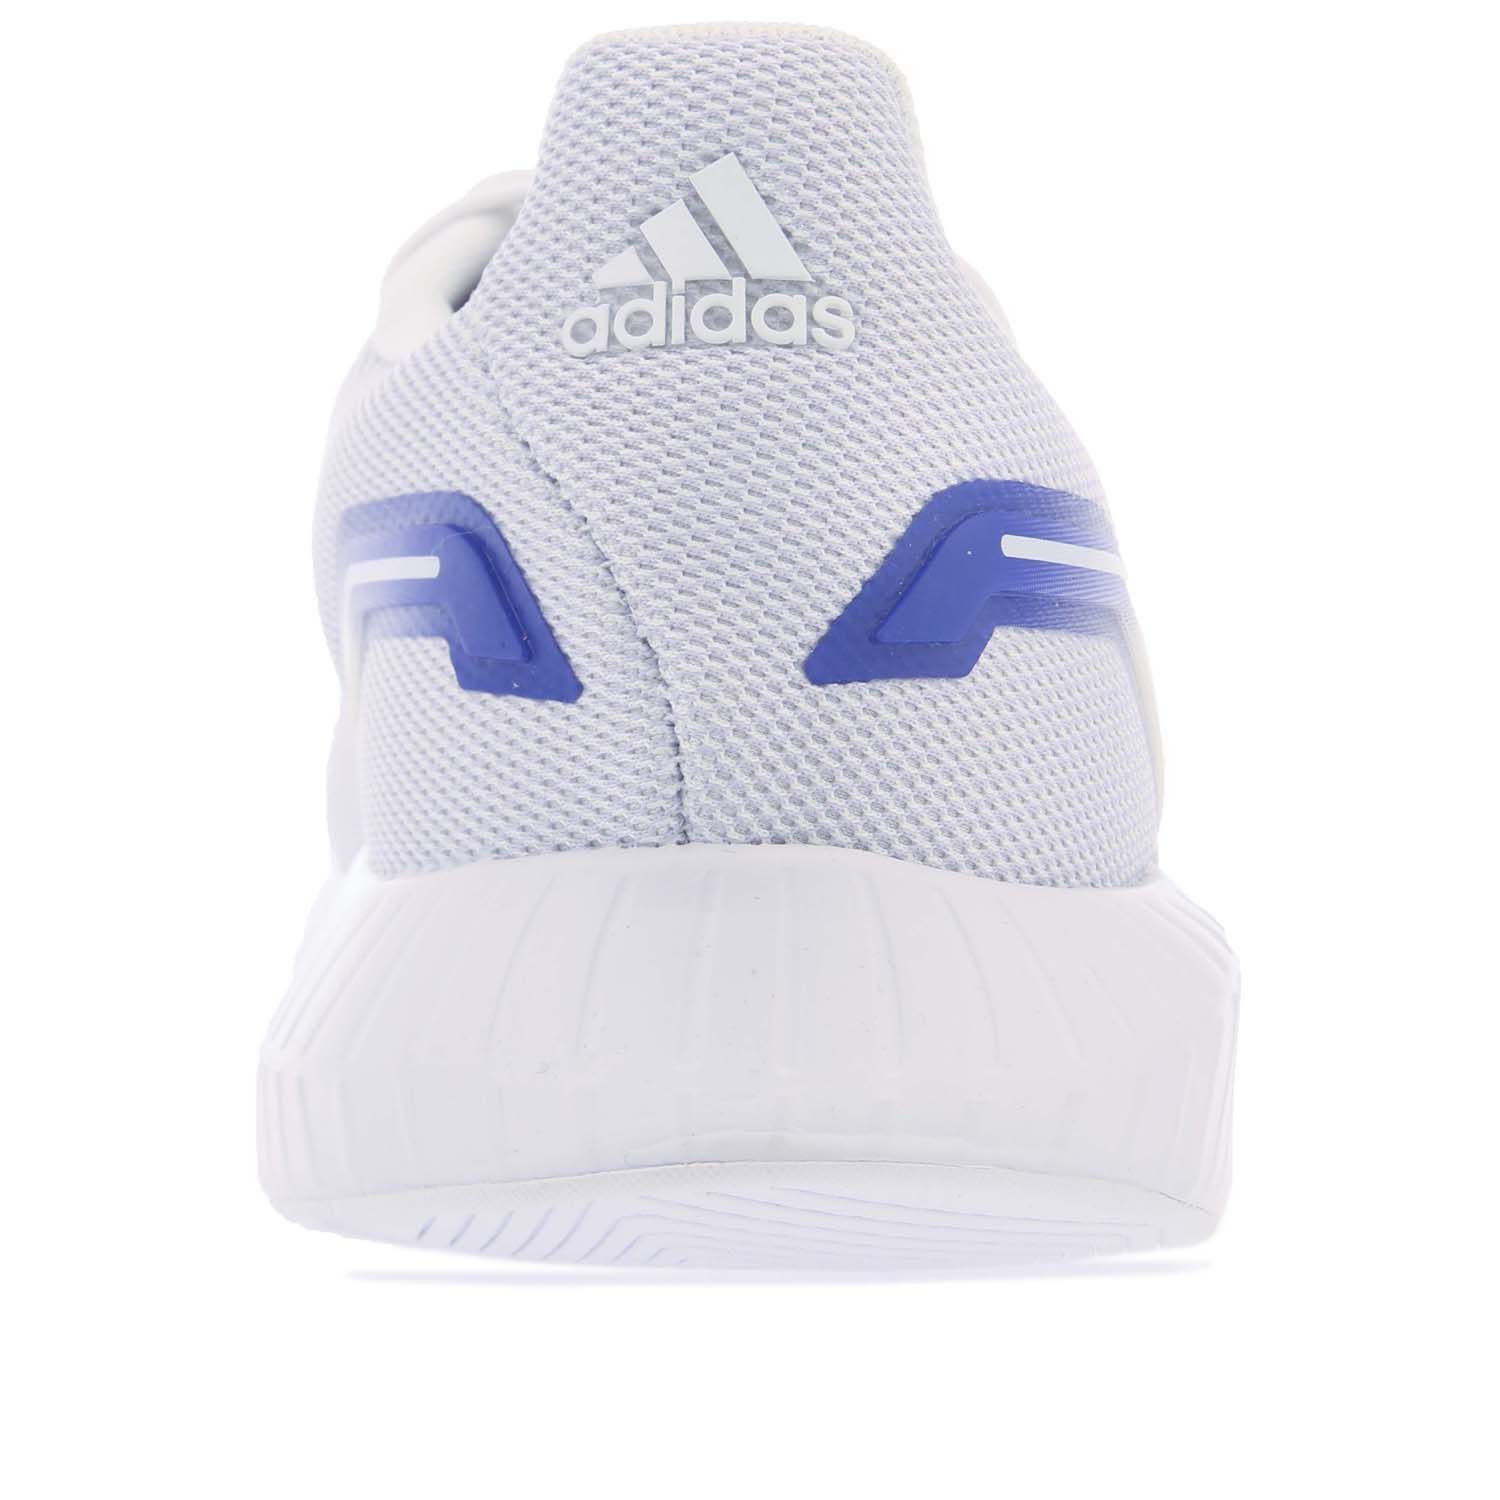 Mens adidas Runfalcon 2.0 Running Shoes in white purple.- Mesh upper.- Lace closure.- Regular fit.- adidas logo on the tongue and heel.- Padded ankle collar. - Lightweight feel.- Cushioning midsole.- Multilayer rubber outsole.- Textile and Synthetic upper  Textile lining  Synthetic sole. - Ref.: FY9626